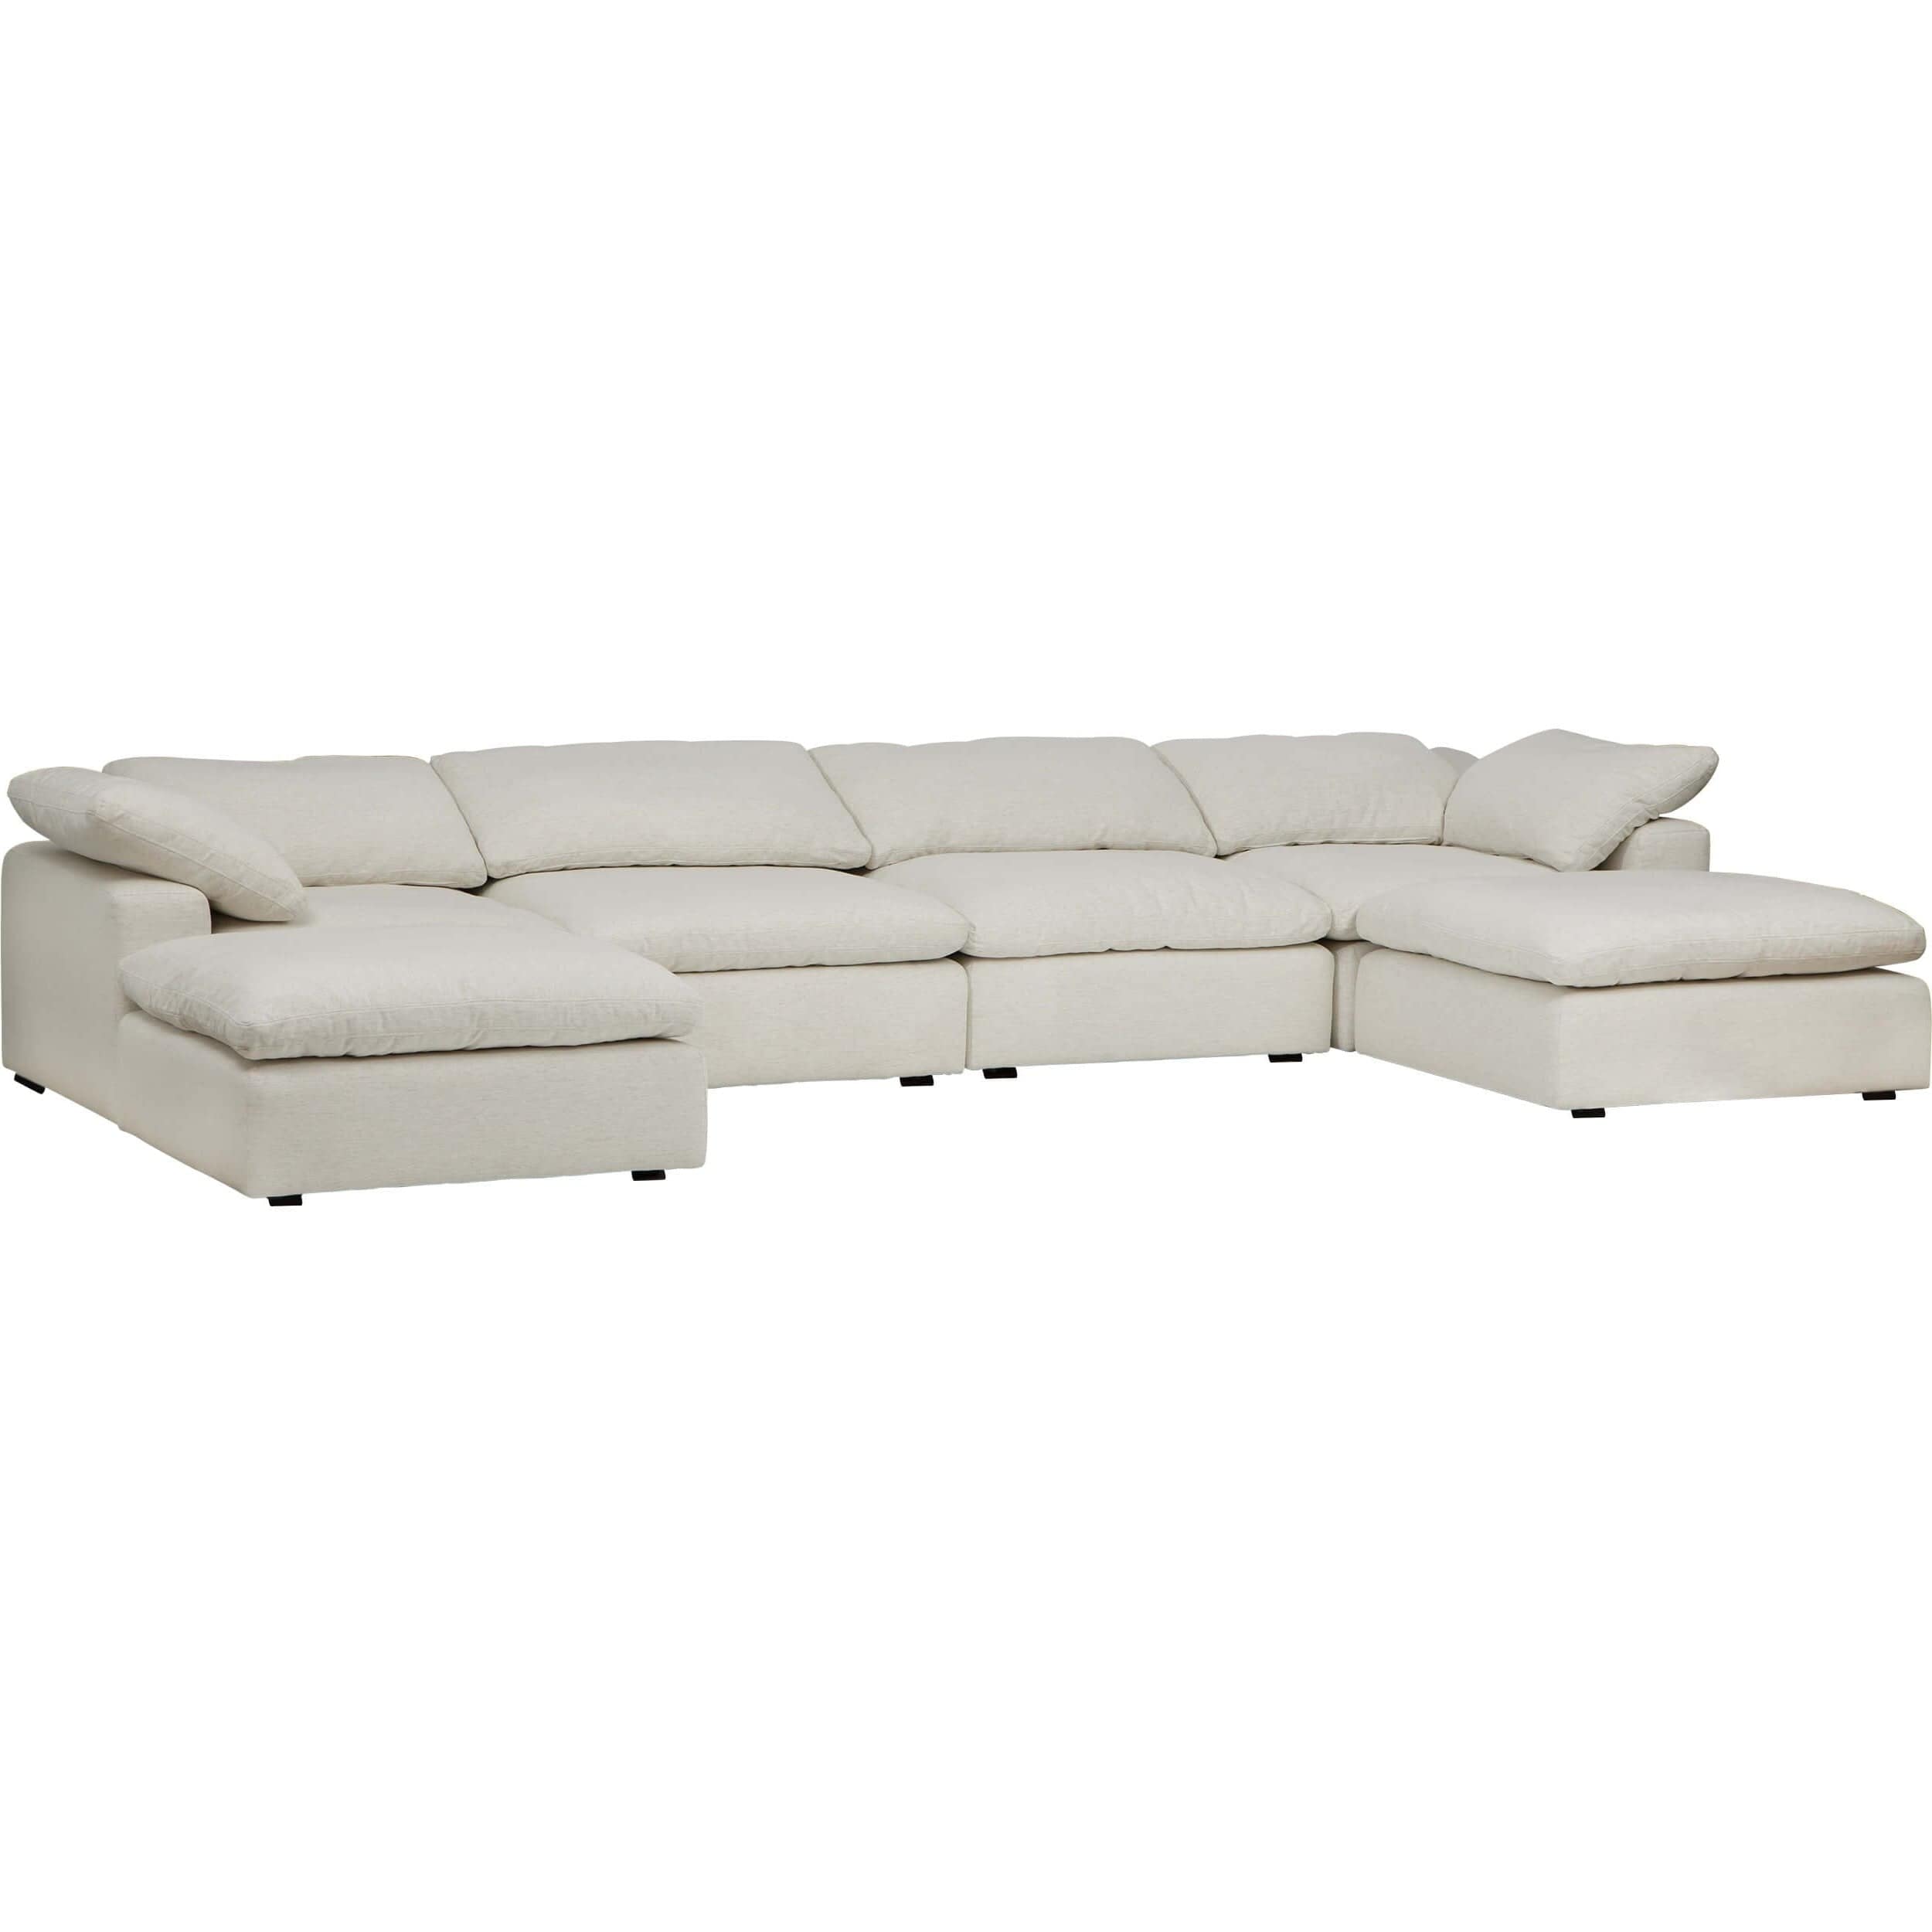 Image of Mateo 6 Piece Modular Sectional, Nomad Snow